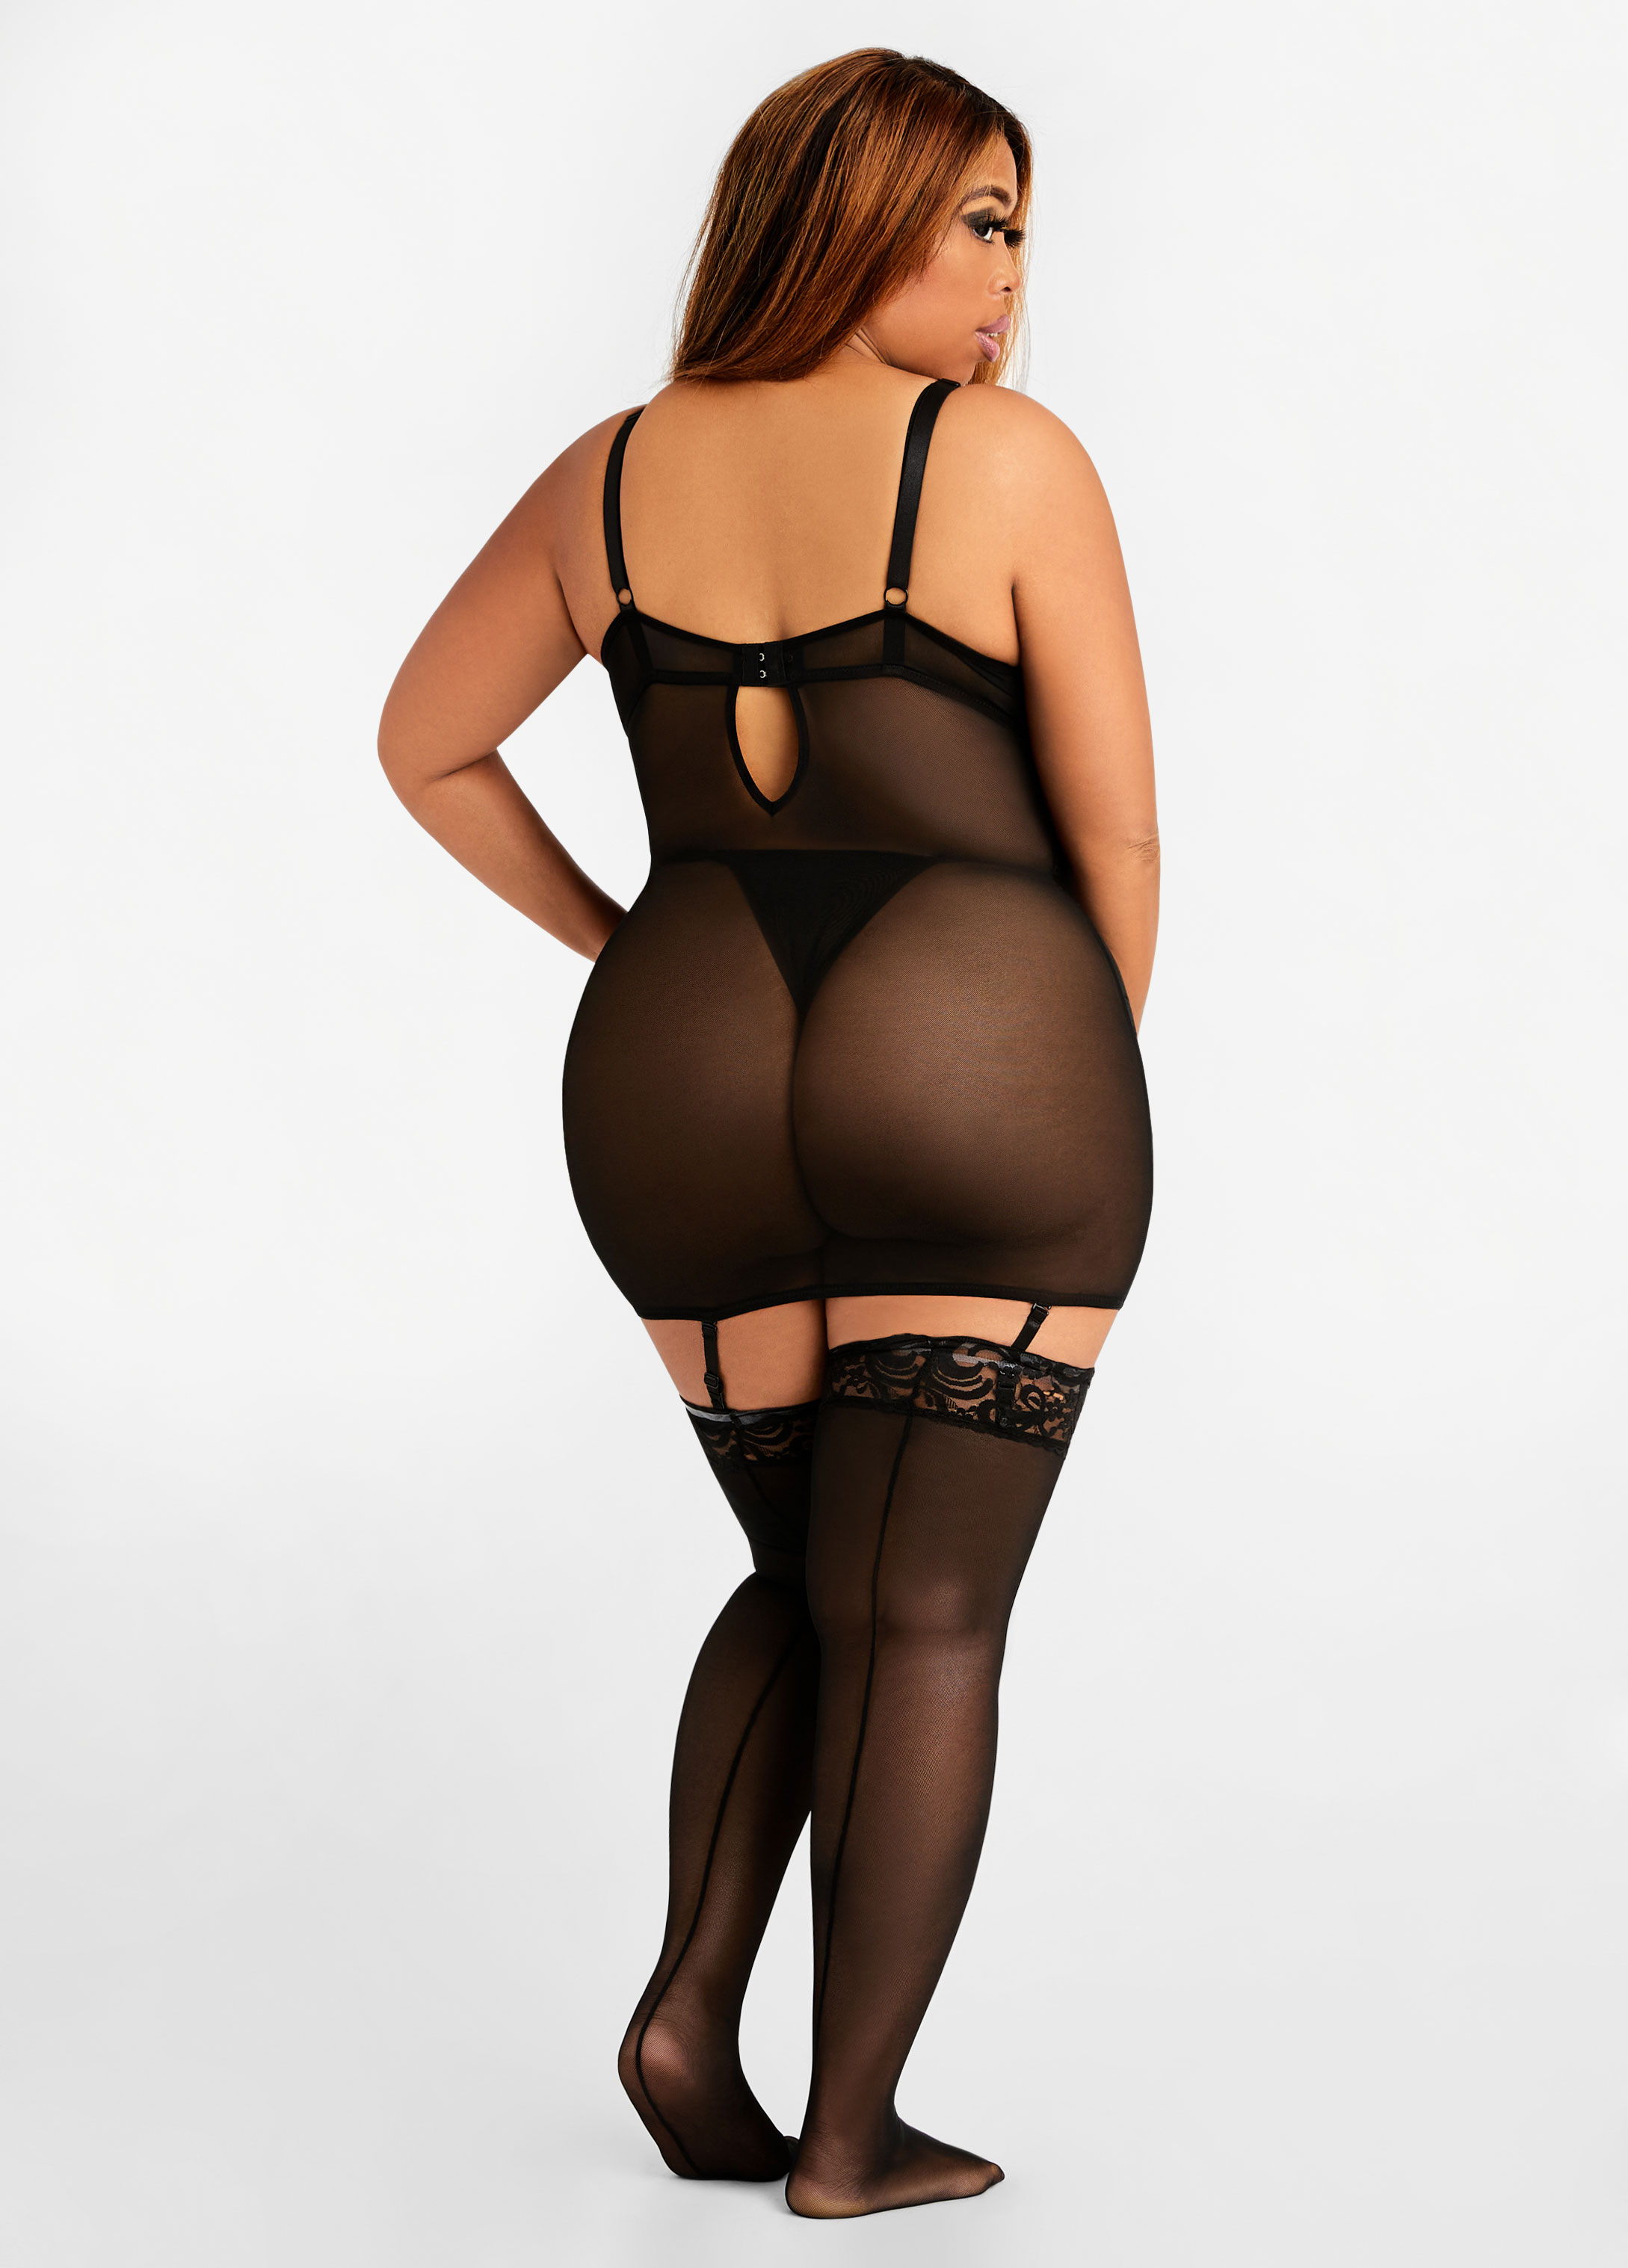 Garter set European and American underwear plus size women's foreign trade  shapewear lace temptation sexy stockings fishnet stockings